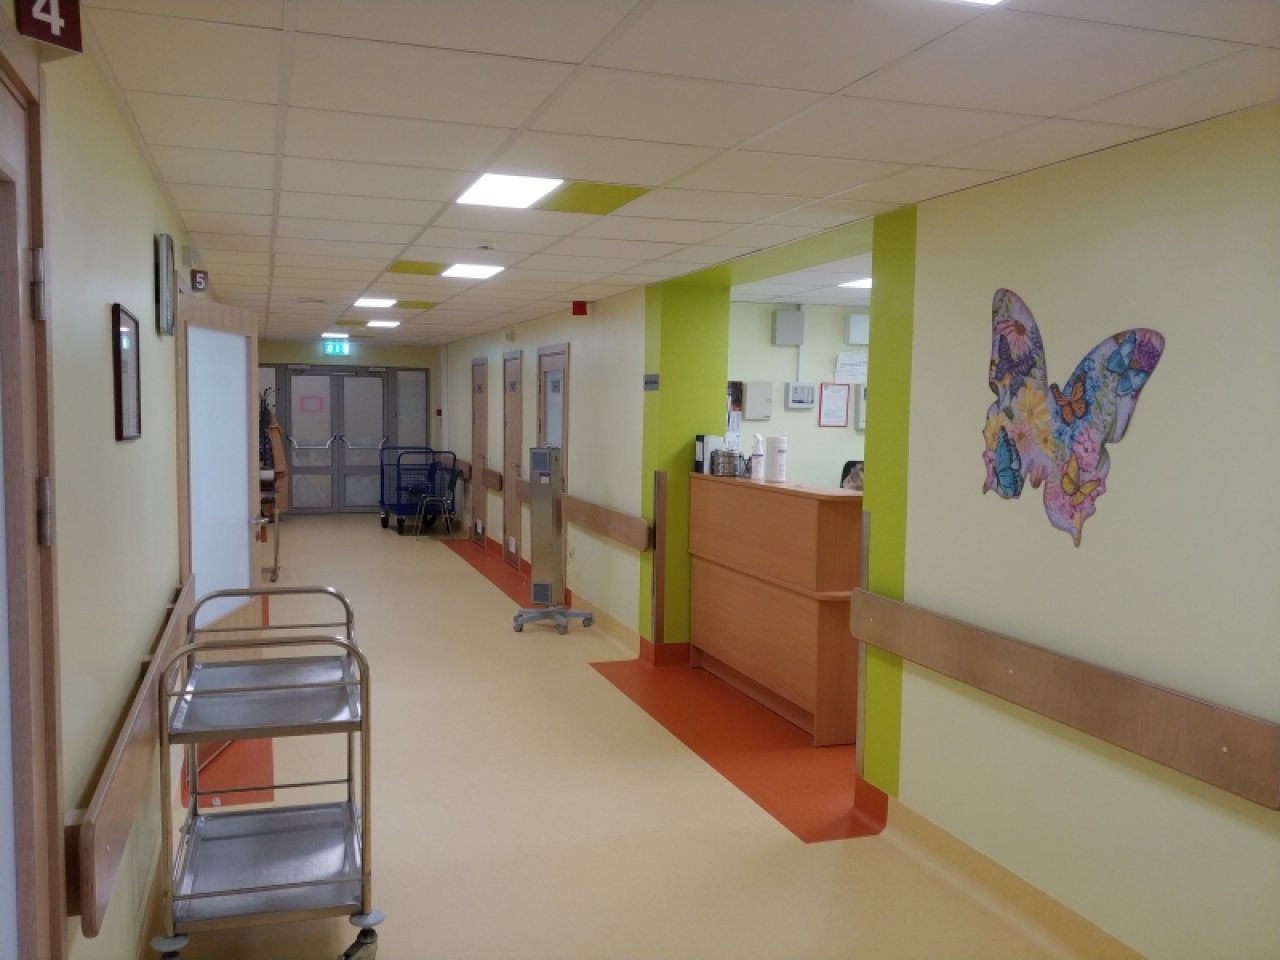 The Infrastructure of Madona Hospital is Improved